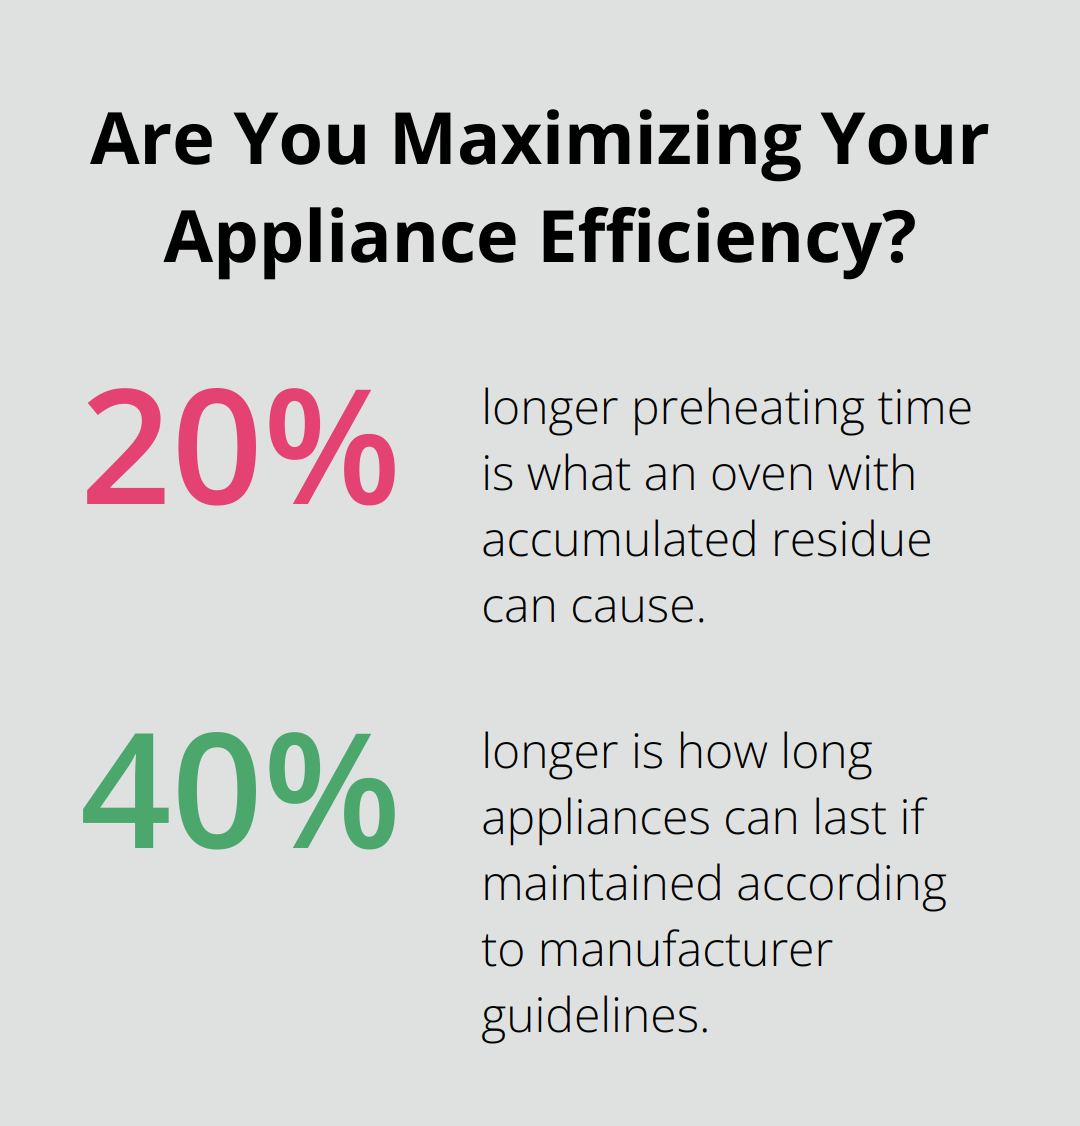 Fact - Are You Maximizing Your Appliance Efficiency?